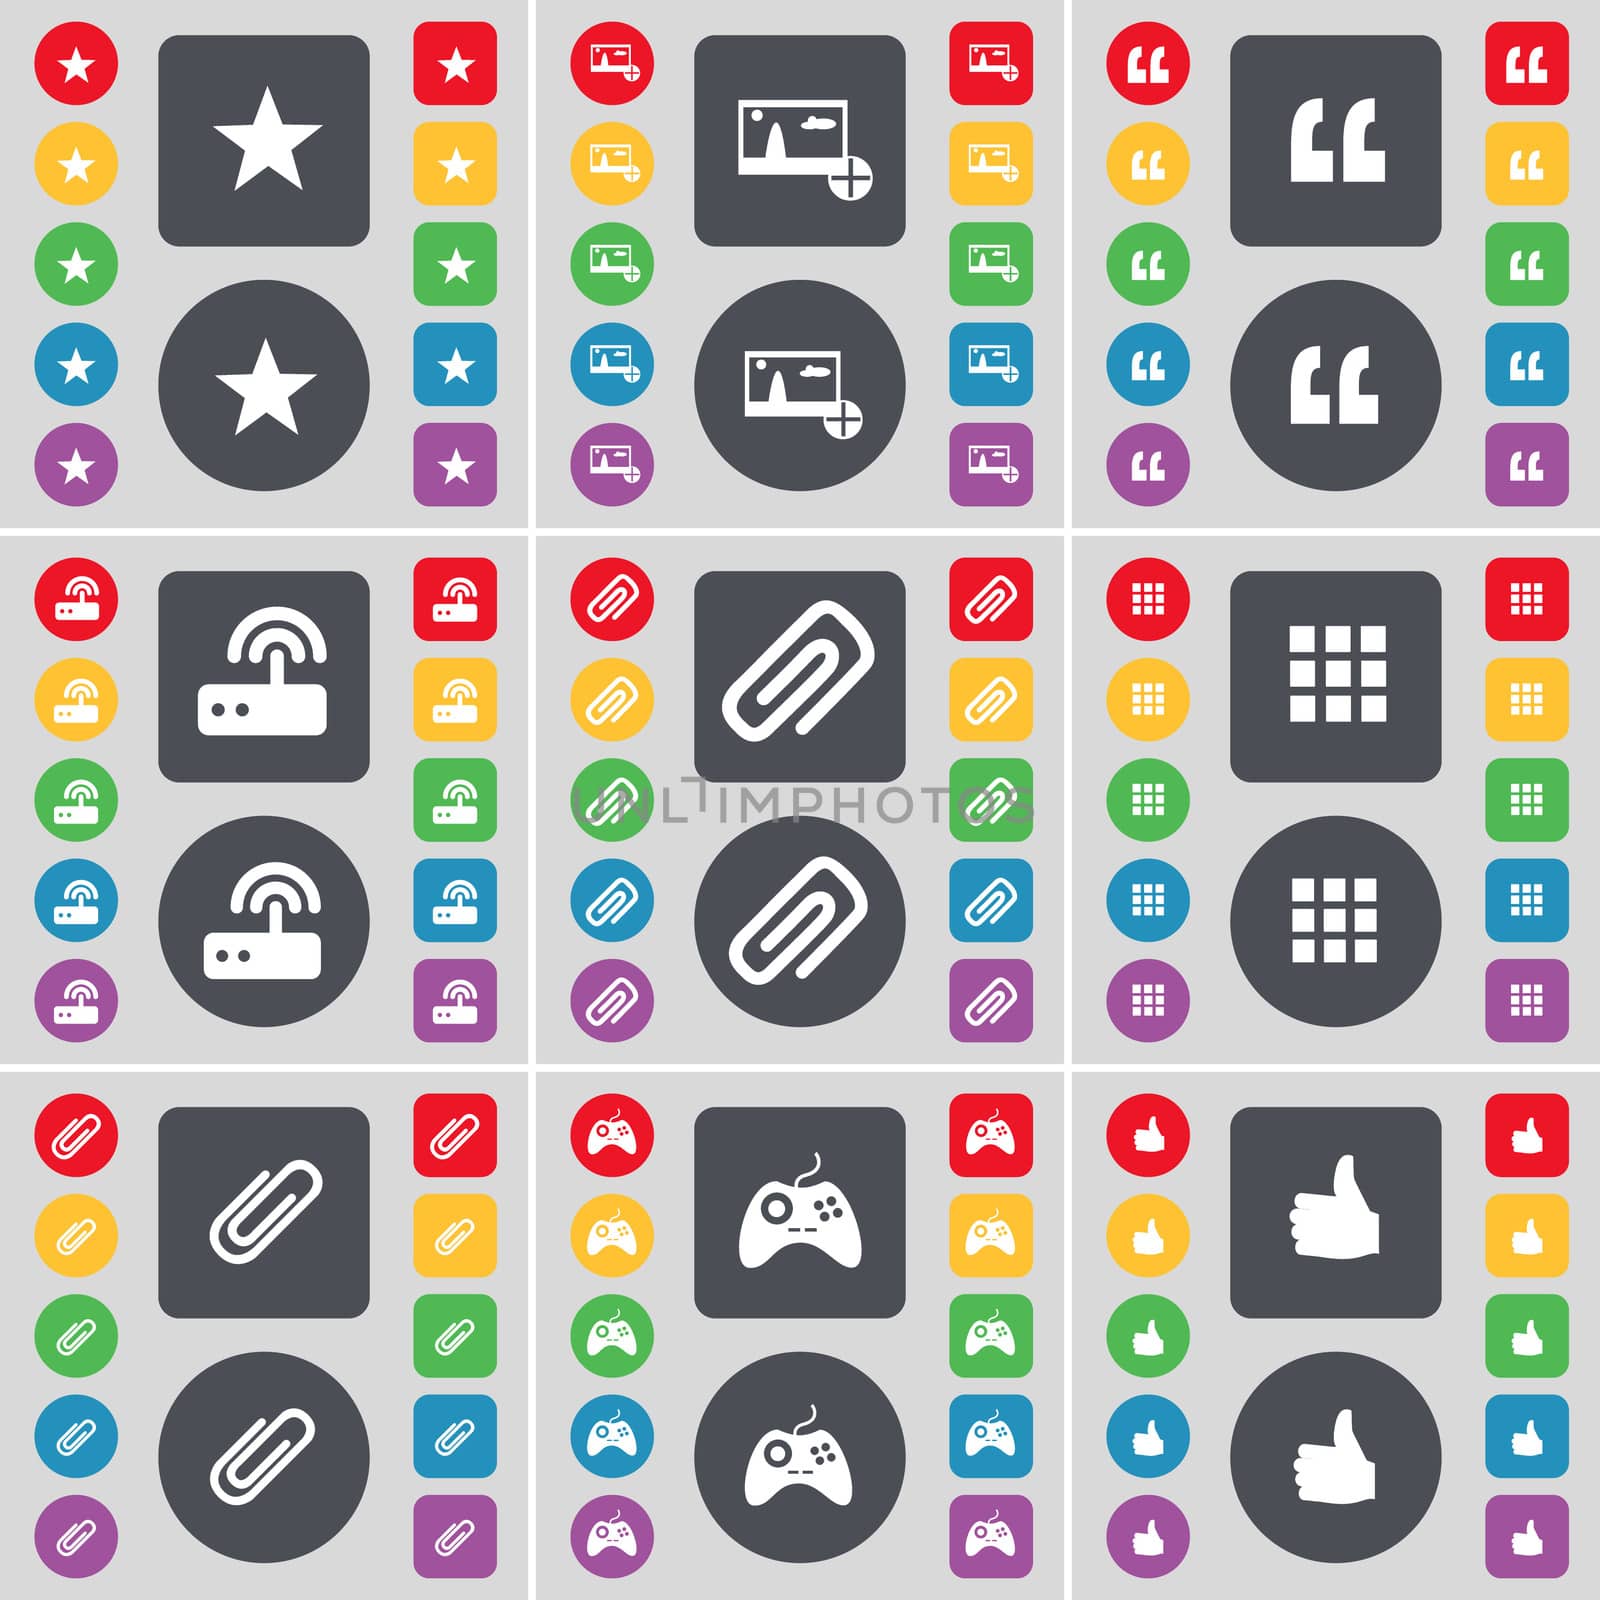 Star, Picture, Quotation mark, Router, Clip, Apps, Gamepad, Like icon symbol. A large set of flat, colored buttons for your design. illustration